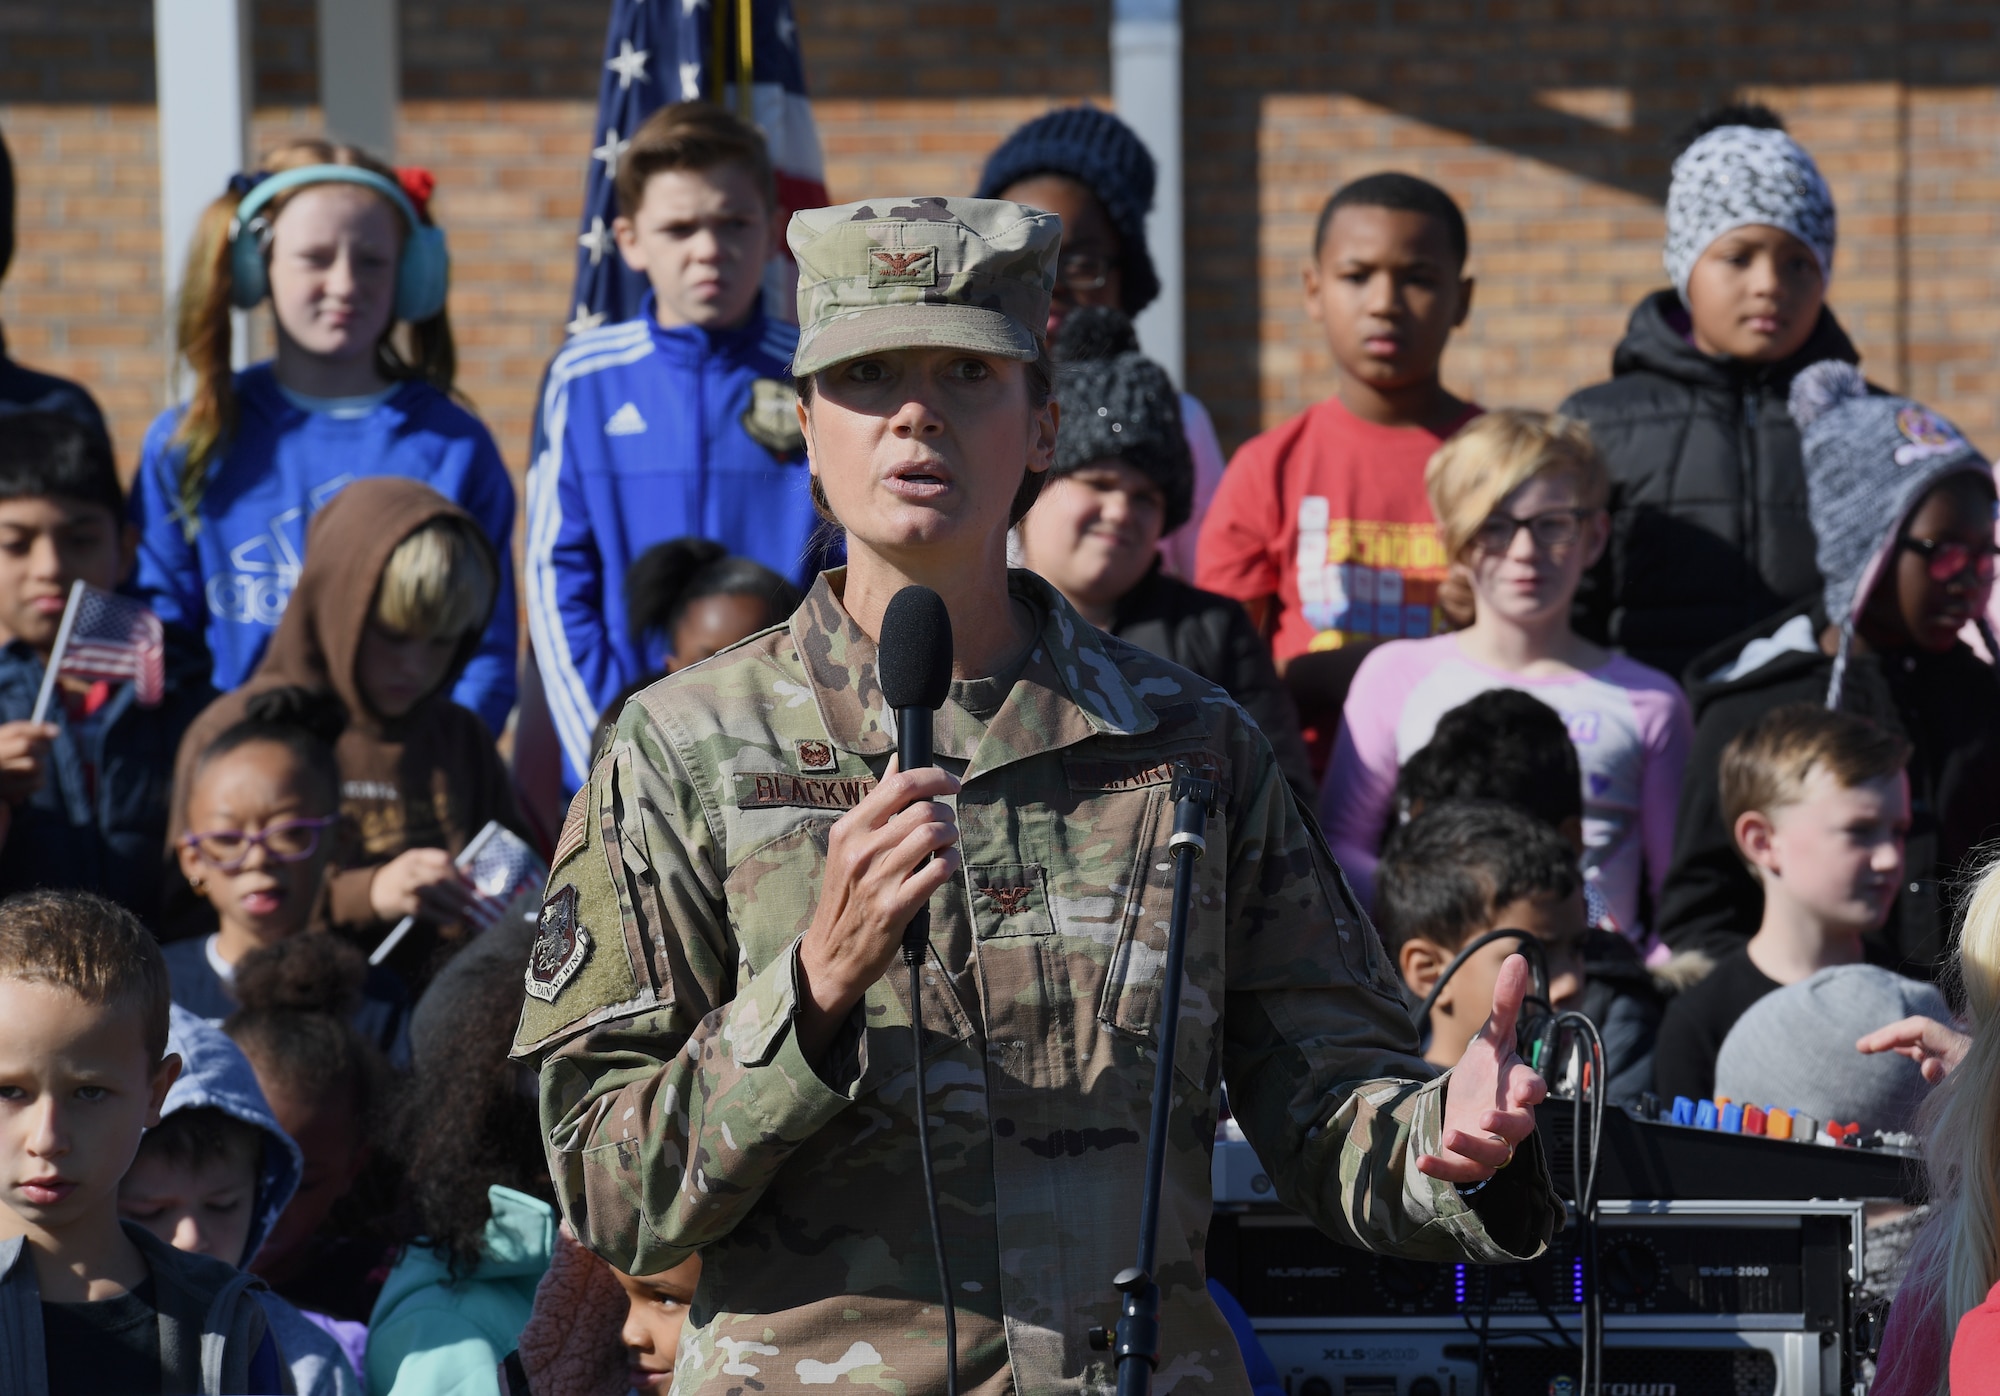 U.S. Air Force Col. Heather Blackwell, 81st Training Wing commander, delivers remarks during a Jeff Davis Elementary School Veterans Day celebration in Biloxi, Mississippi, Nov. 15, 2019. During the event, students also recited the Pledge of Allegiance. Keesler Air Force Base leadership and base personnel attended the event. (U.S. Air Force photo by Kemberly Groue)